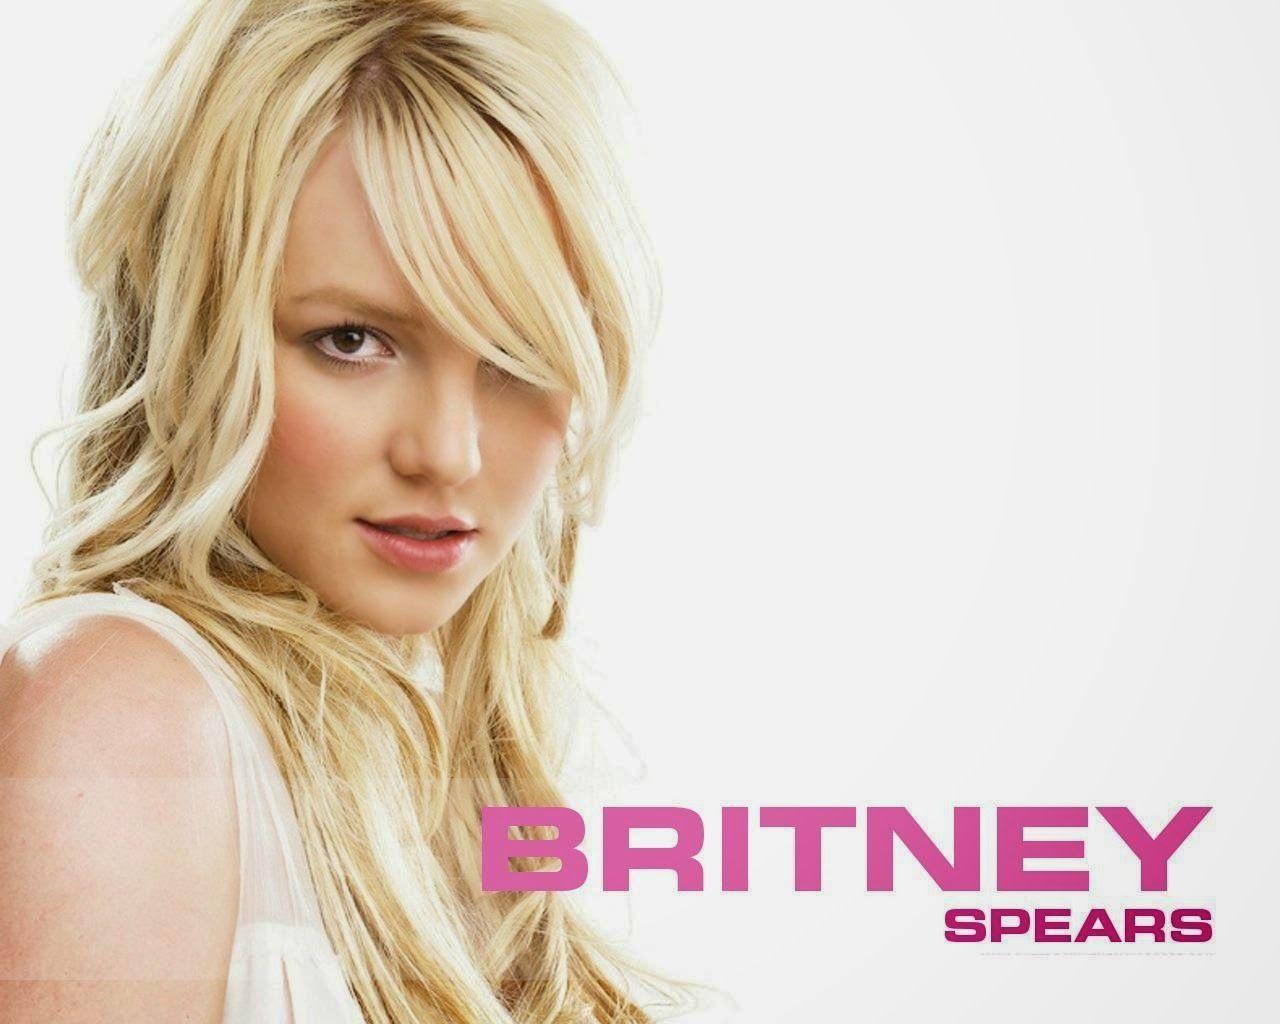 Hollywood Actress Wallpaper: Britney Spears Wallpaper Free Download